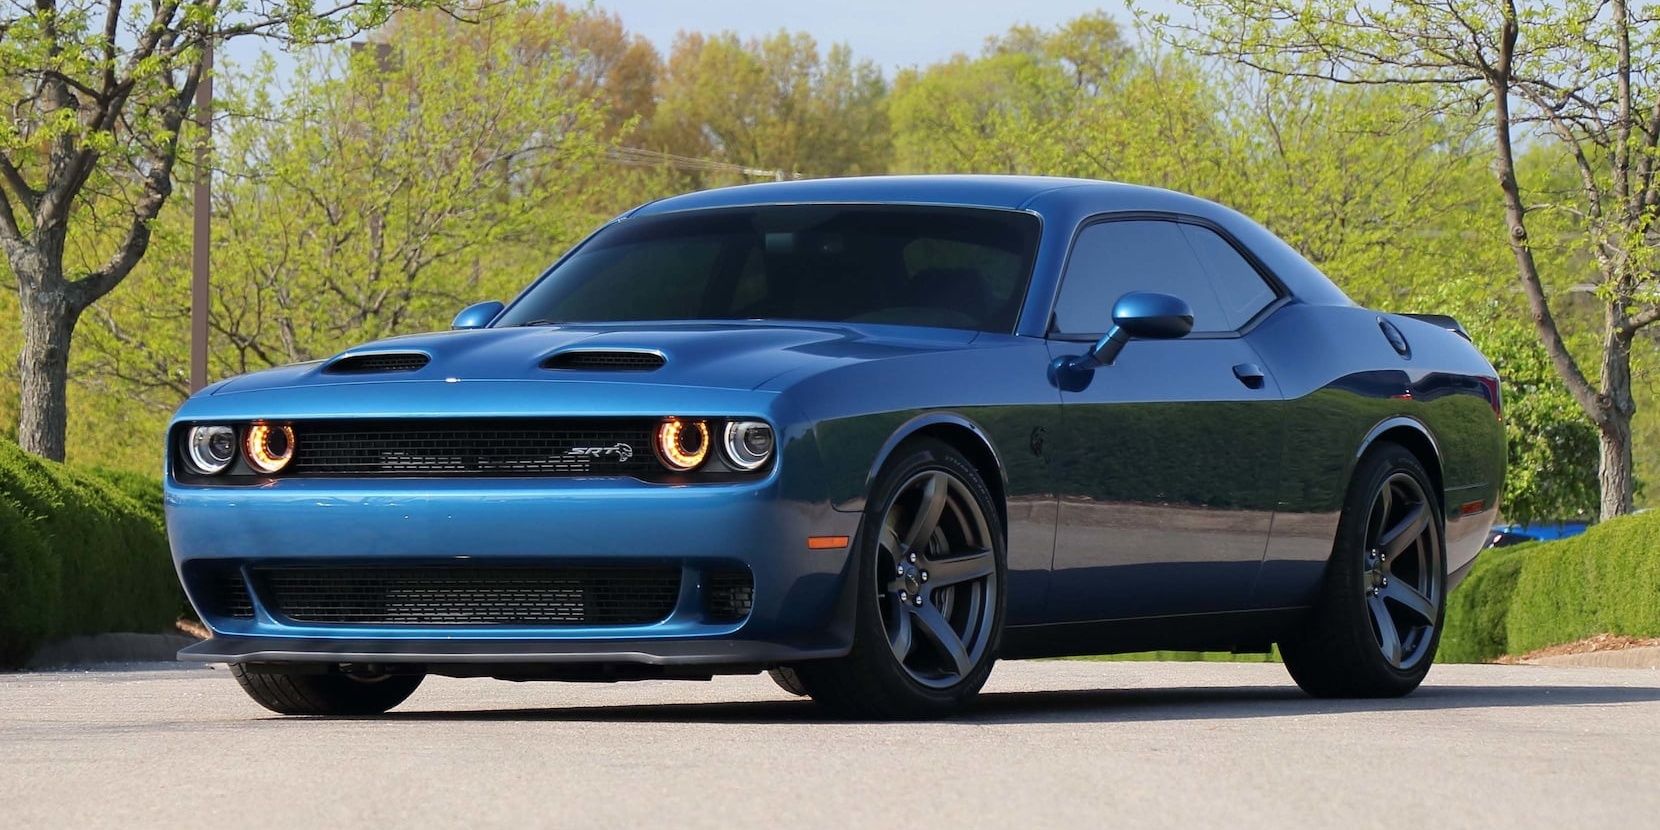 2021 Dodge Challenger Hellcat cropped